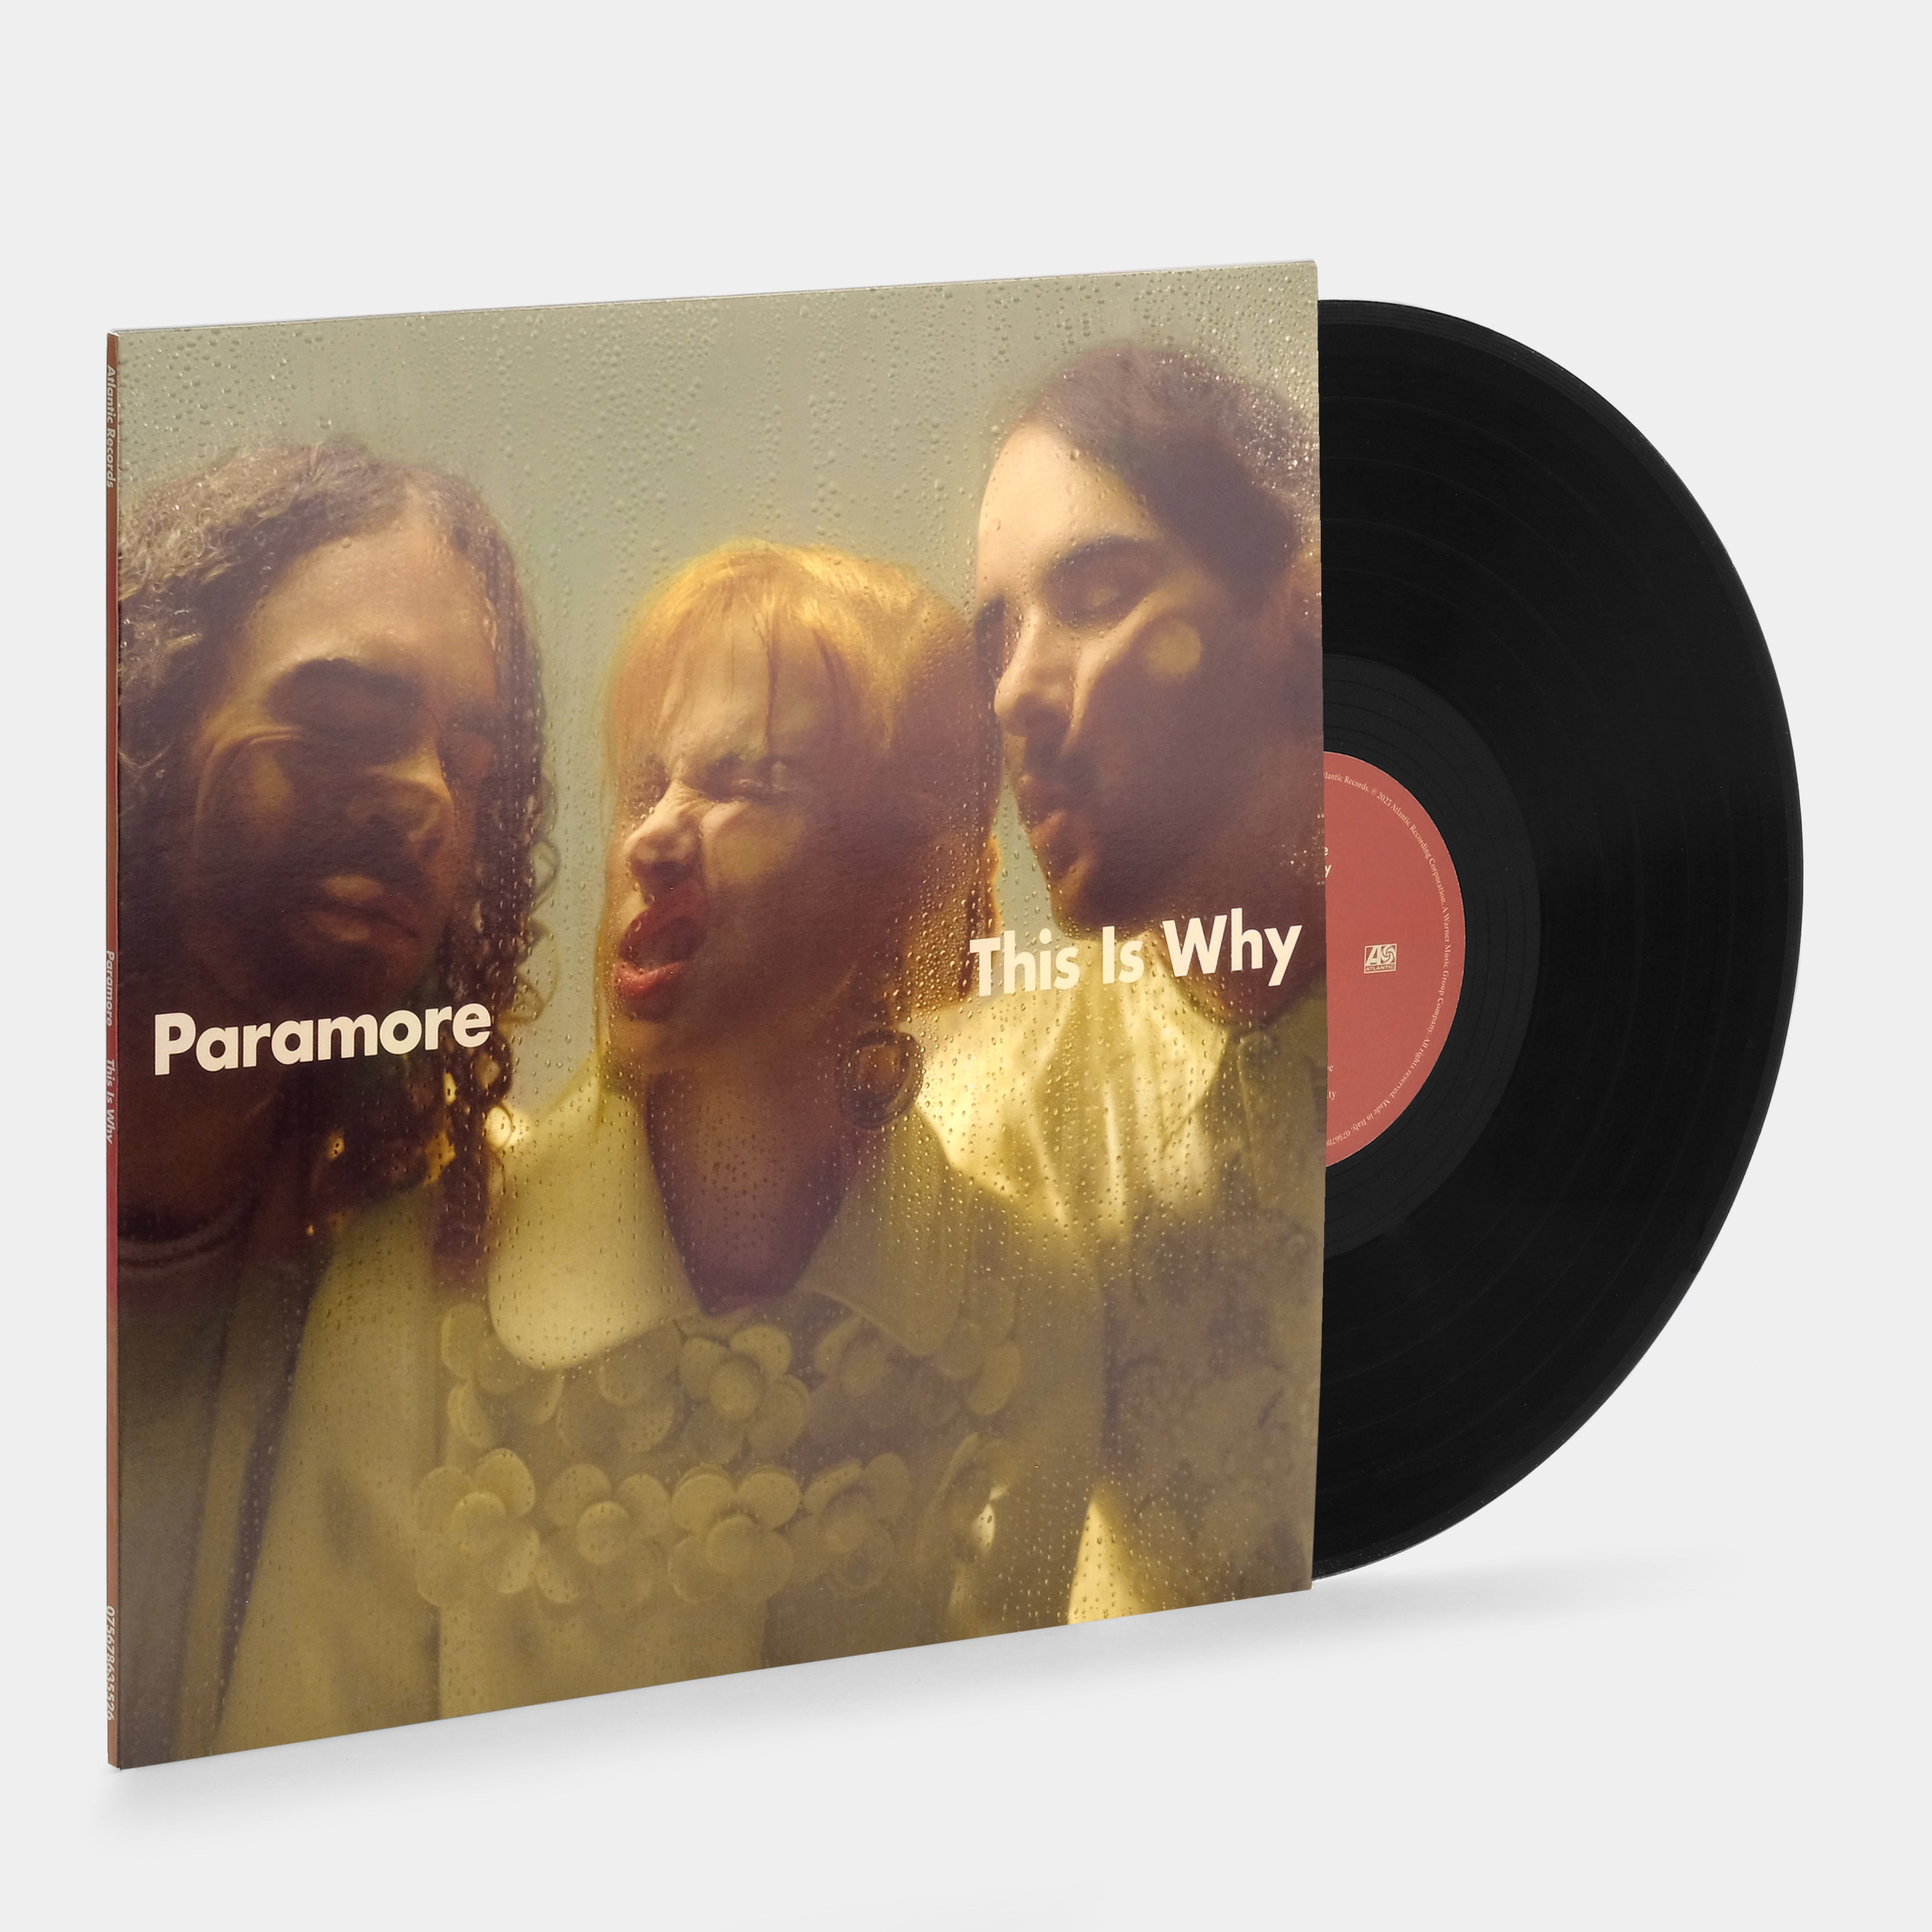 Paramore - This Is Why LP Vinyl Record